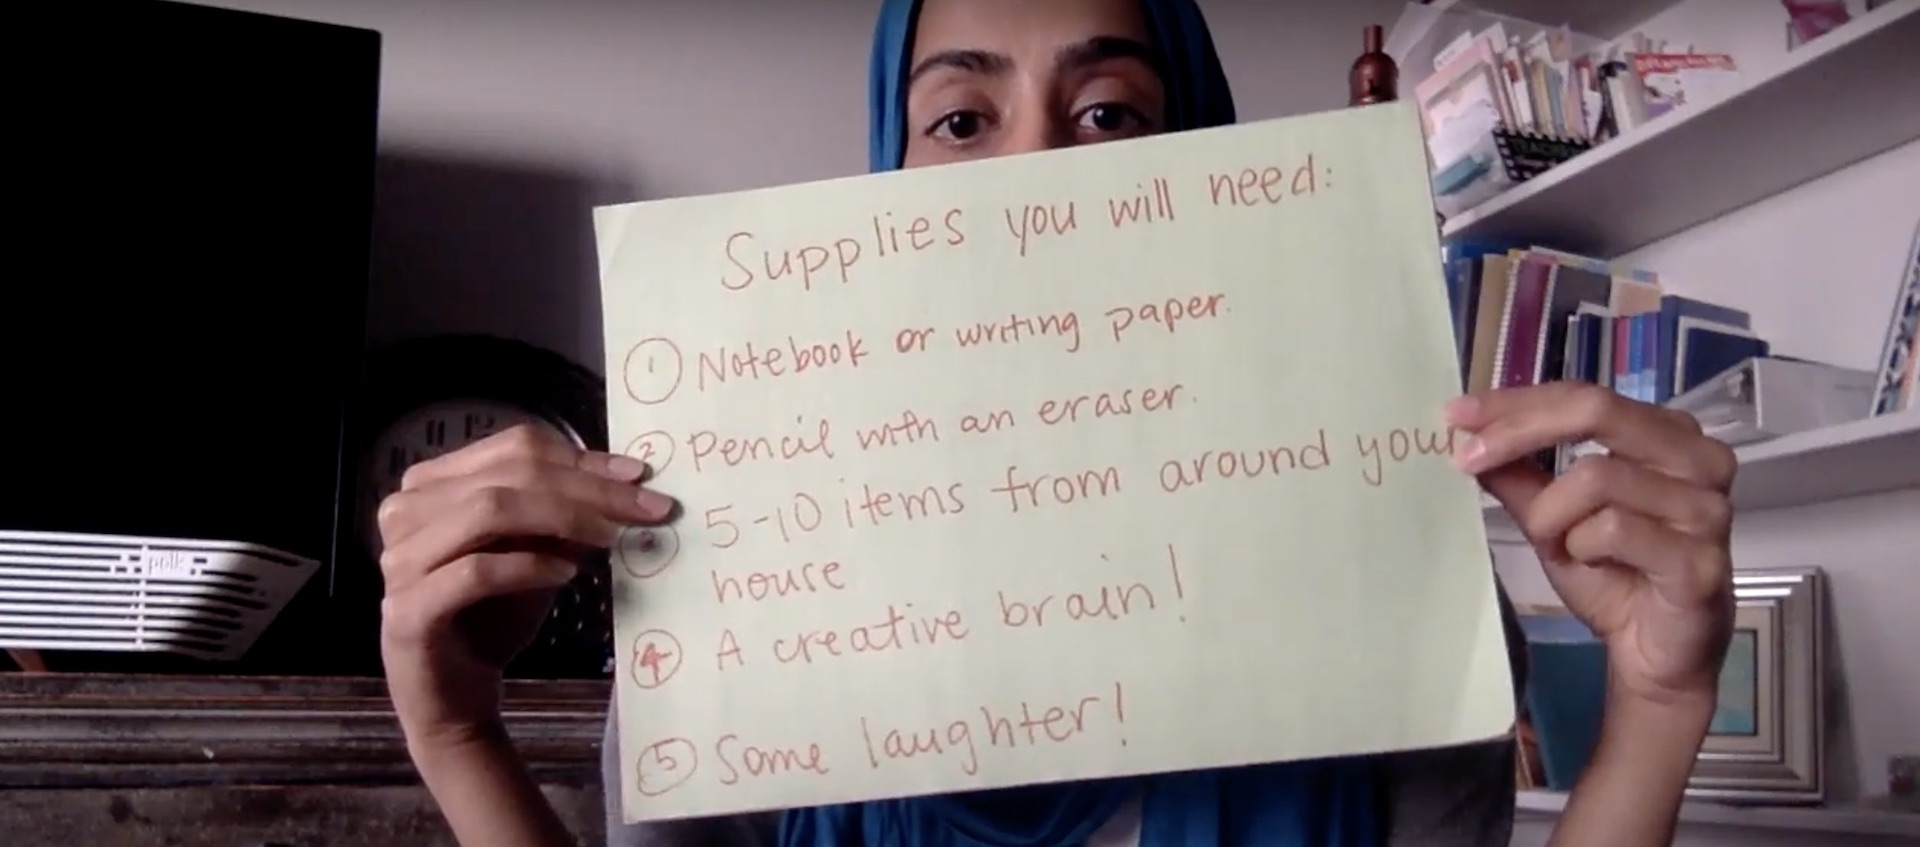 Artist Fariha Tayyab sits in her living room holding a small handwritten sign in front of her face, obscuring all of it but her eyes